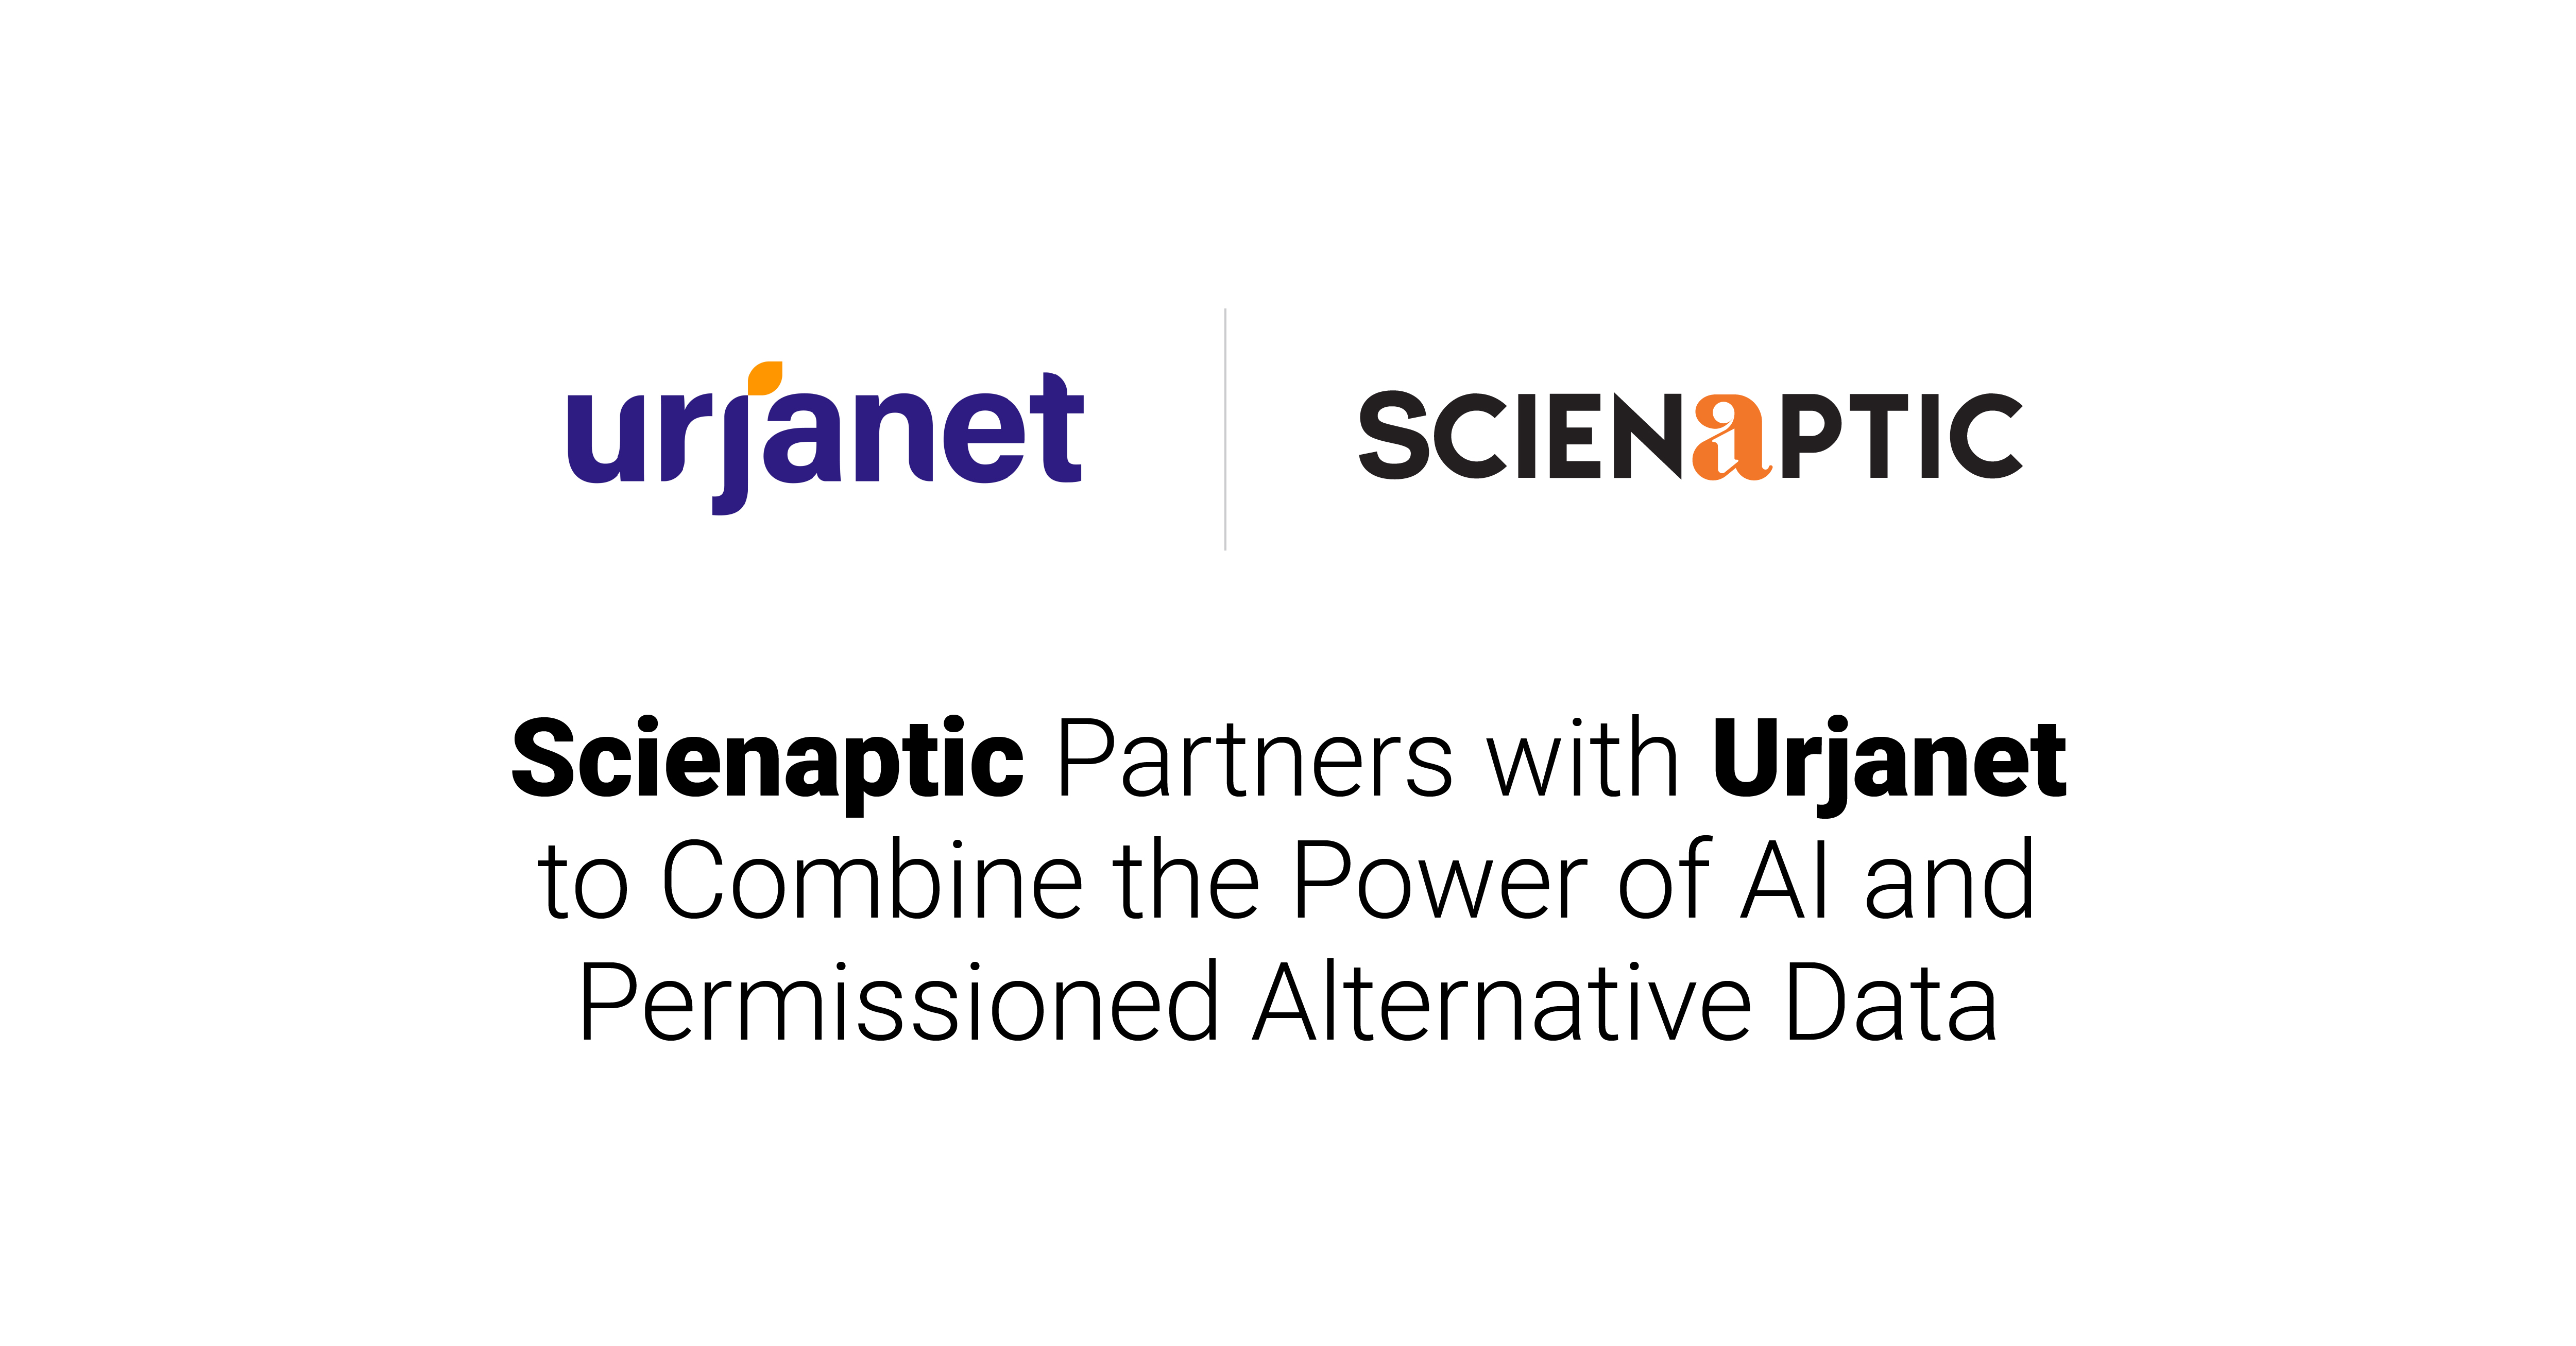 Scienaptic Partners with Urjanet to Combine the Power of AI and Permissioned Alternative Data